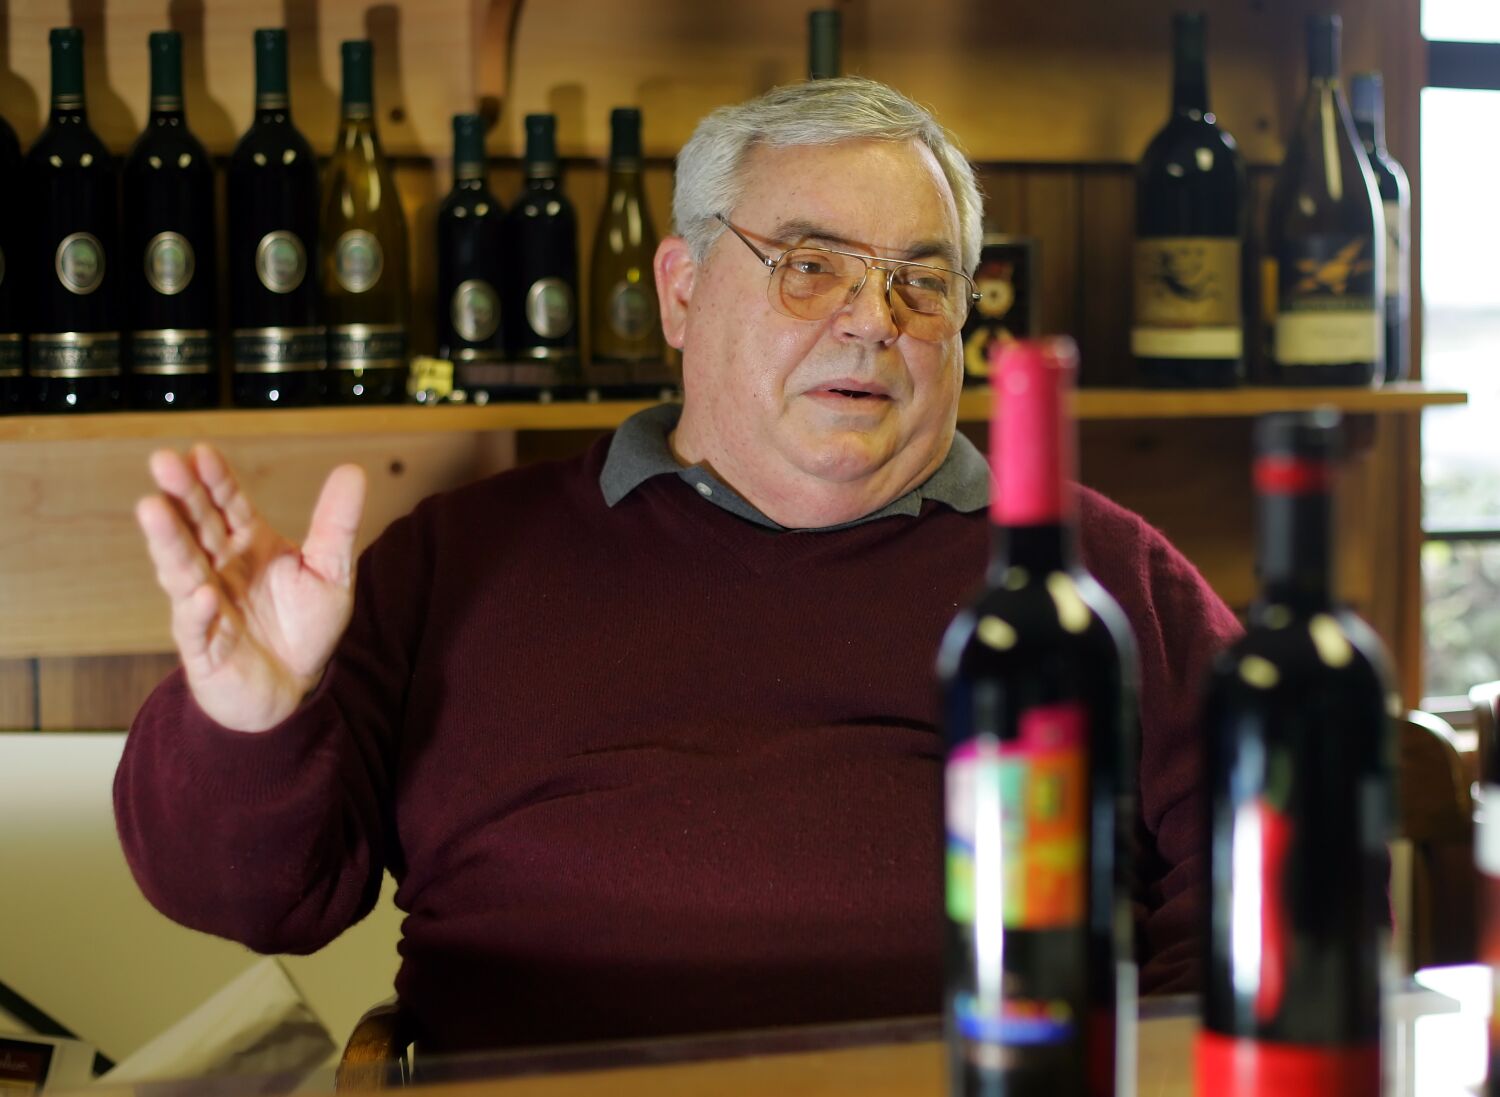 Fred Franzia, champion of affordable wine who conceived 'Two Buck Chuck,' dies at 79